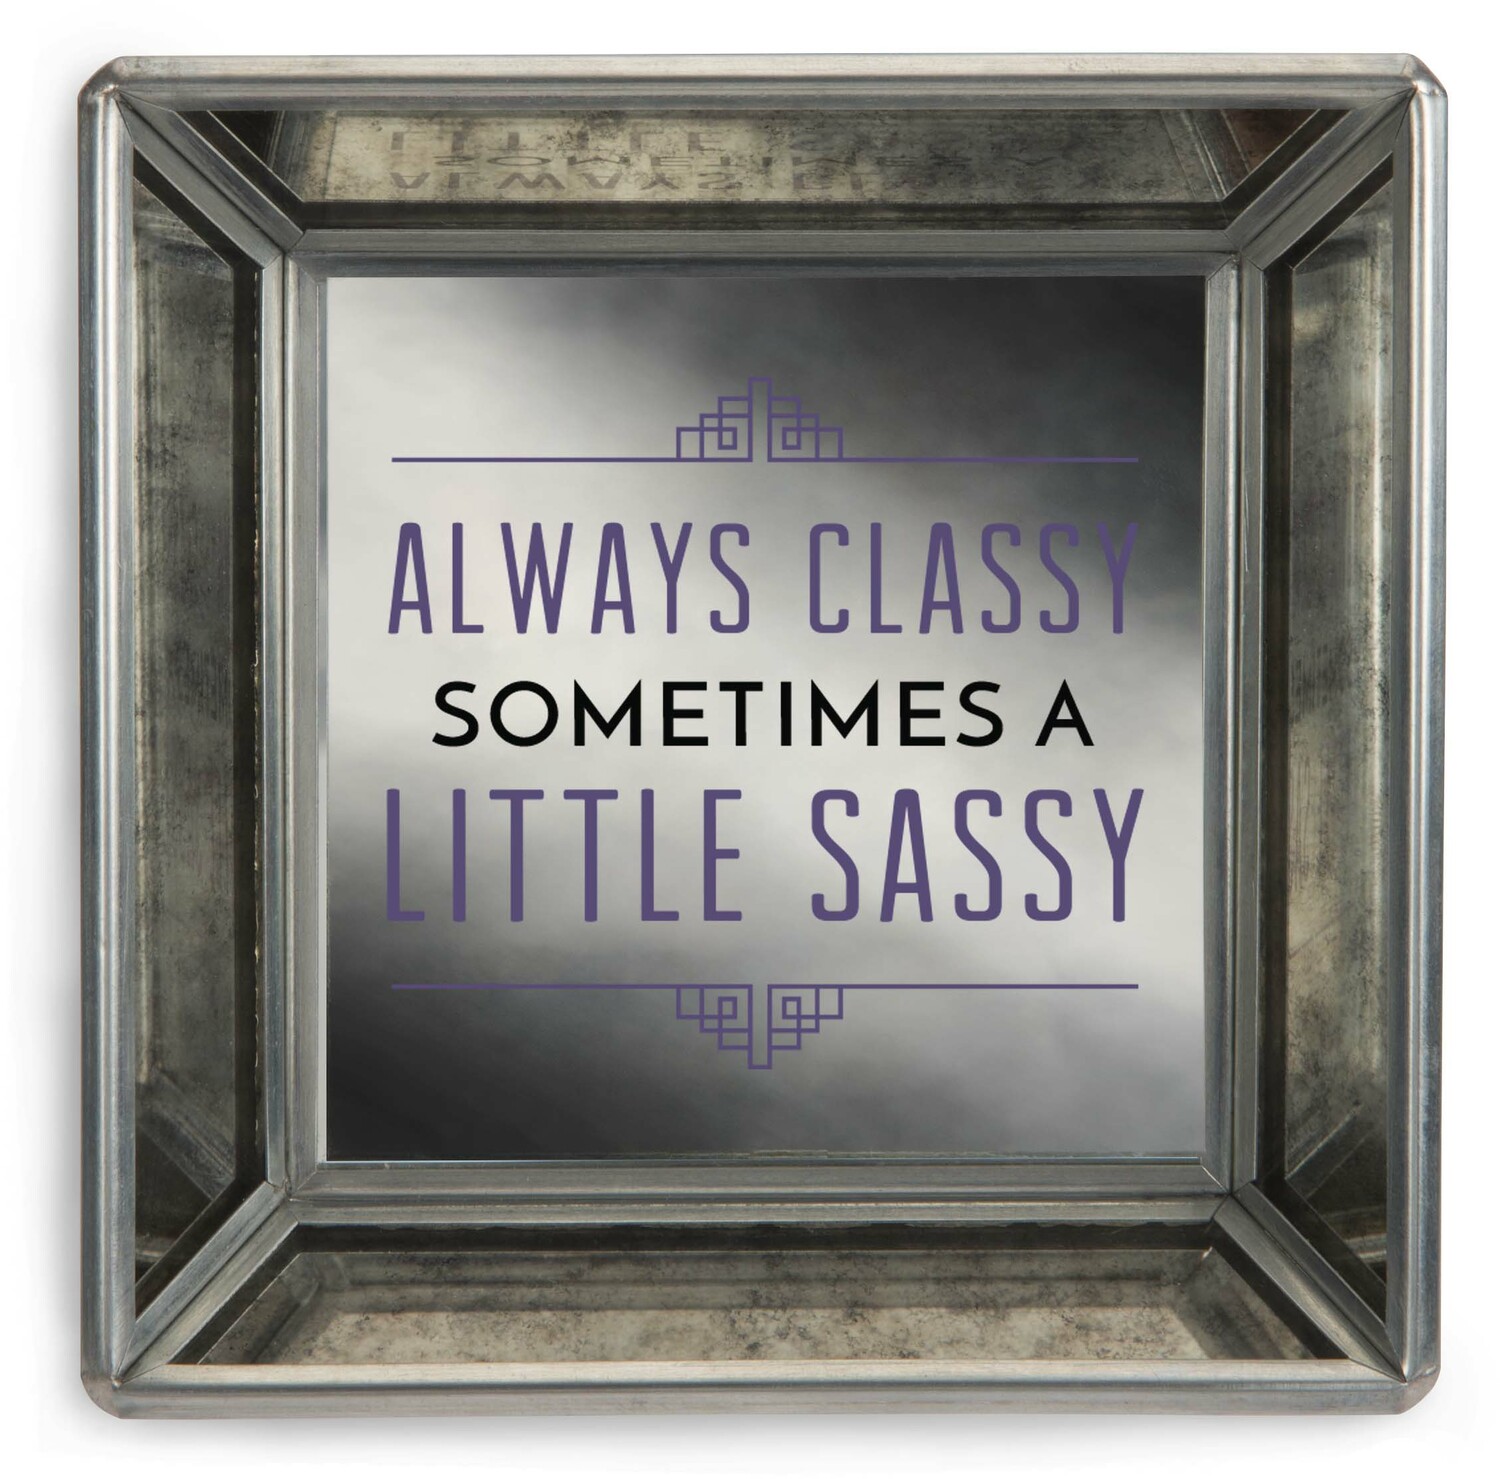 Classy and Sassy by Pretty Inappropriate - Classy and Sassy - 4" Mirrored Tray